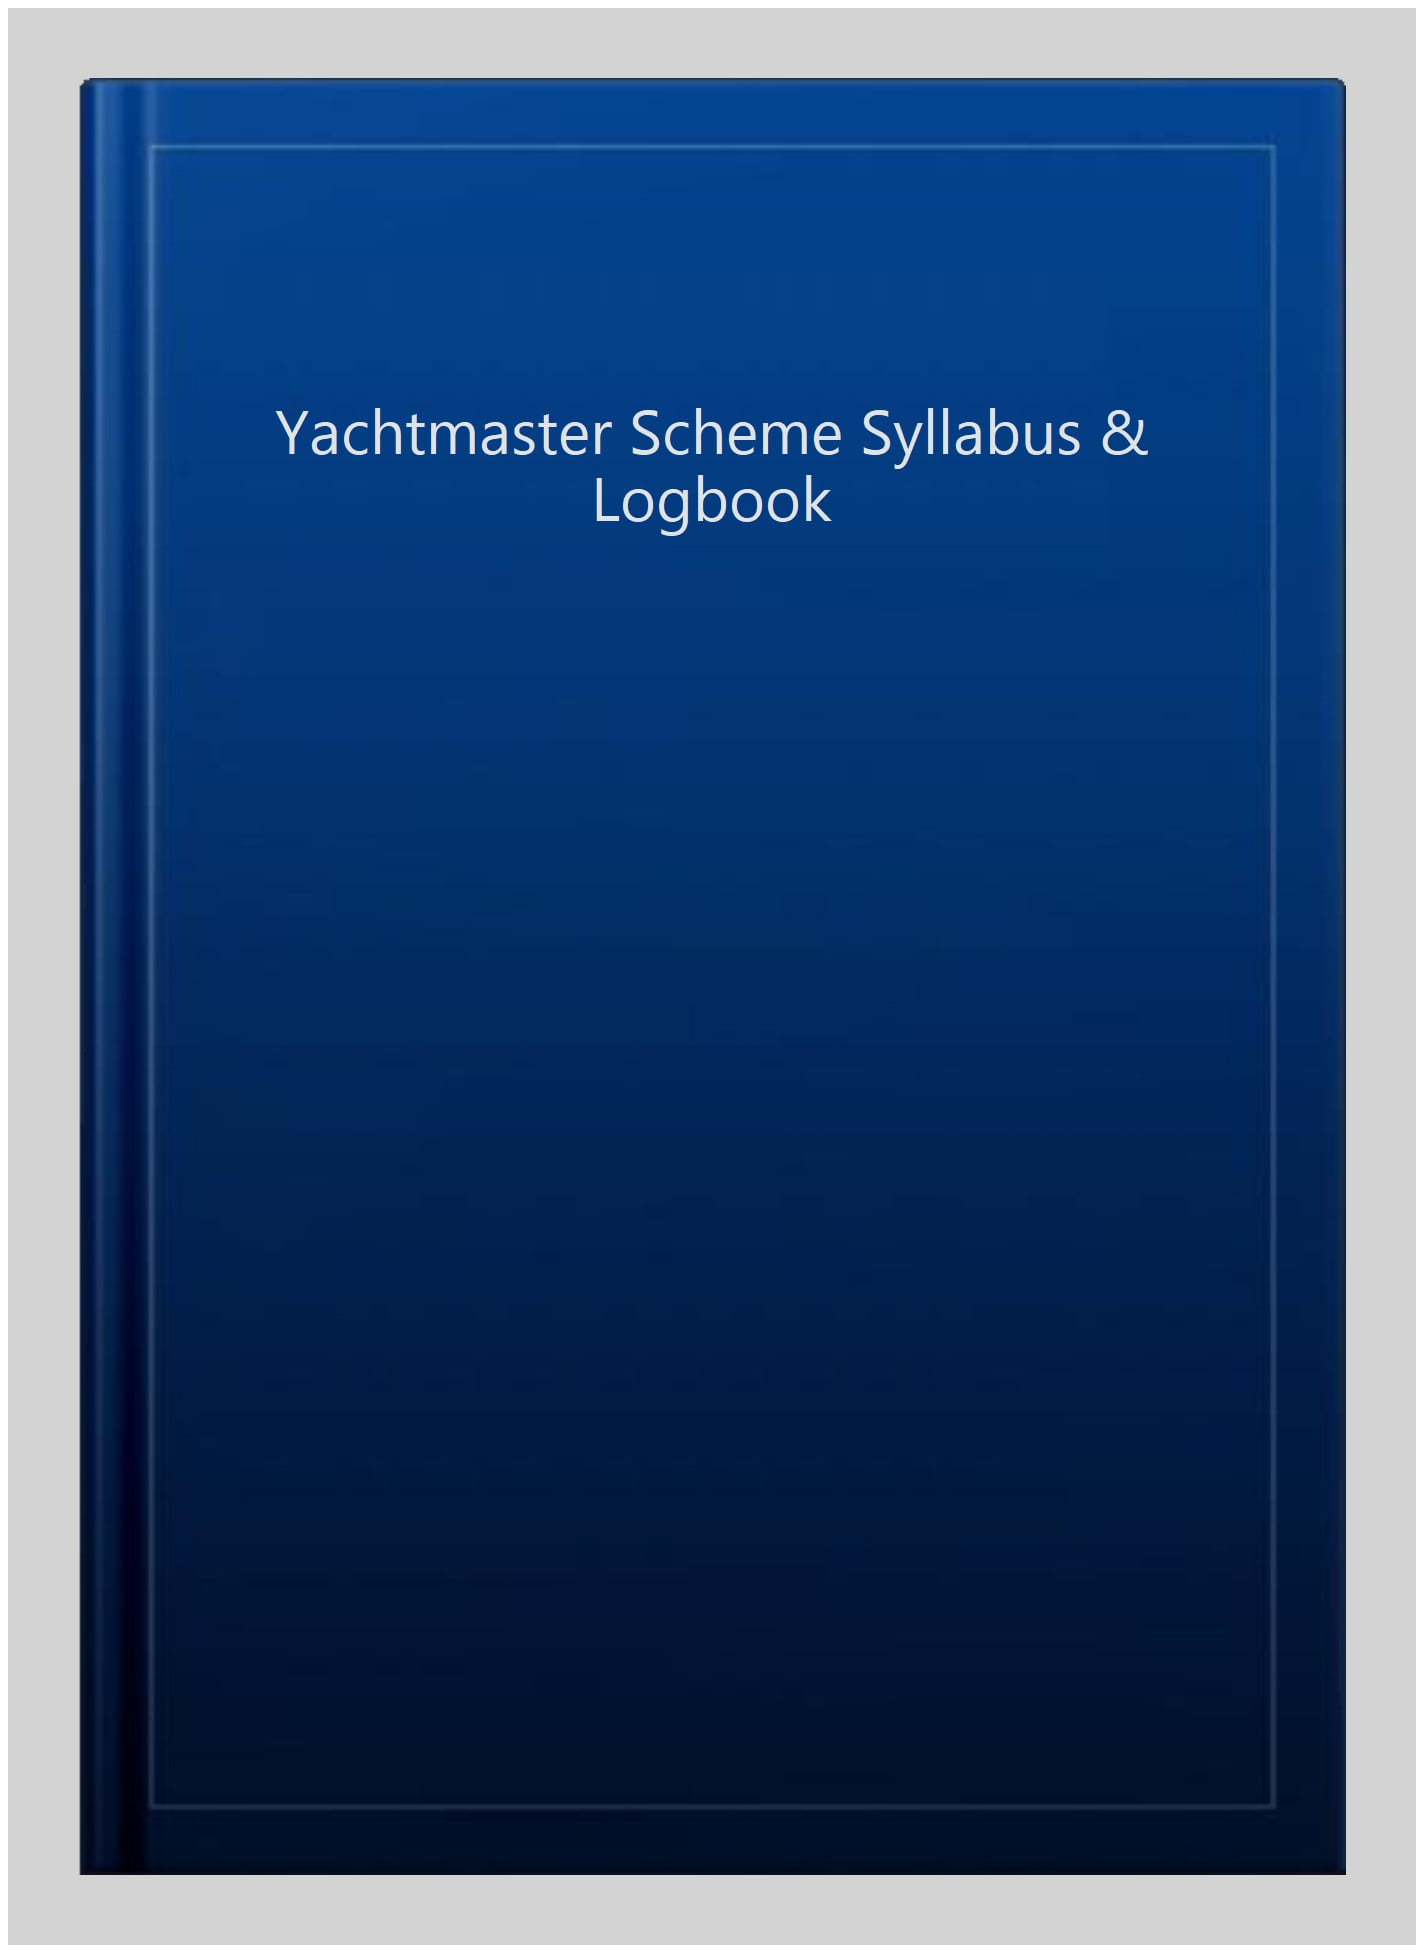 yachtmaster scheme syllabus and logbook